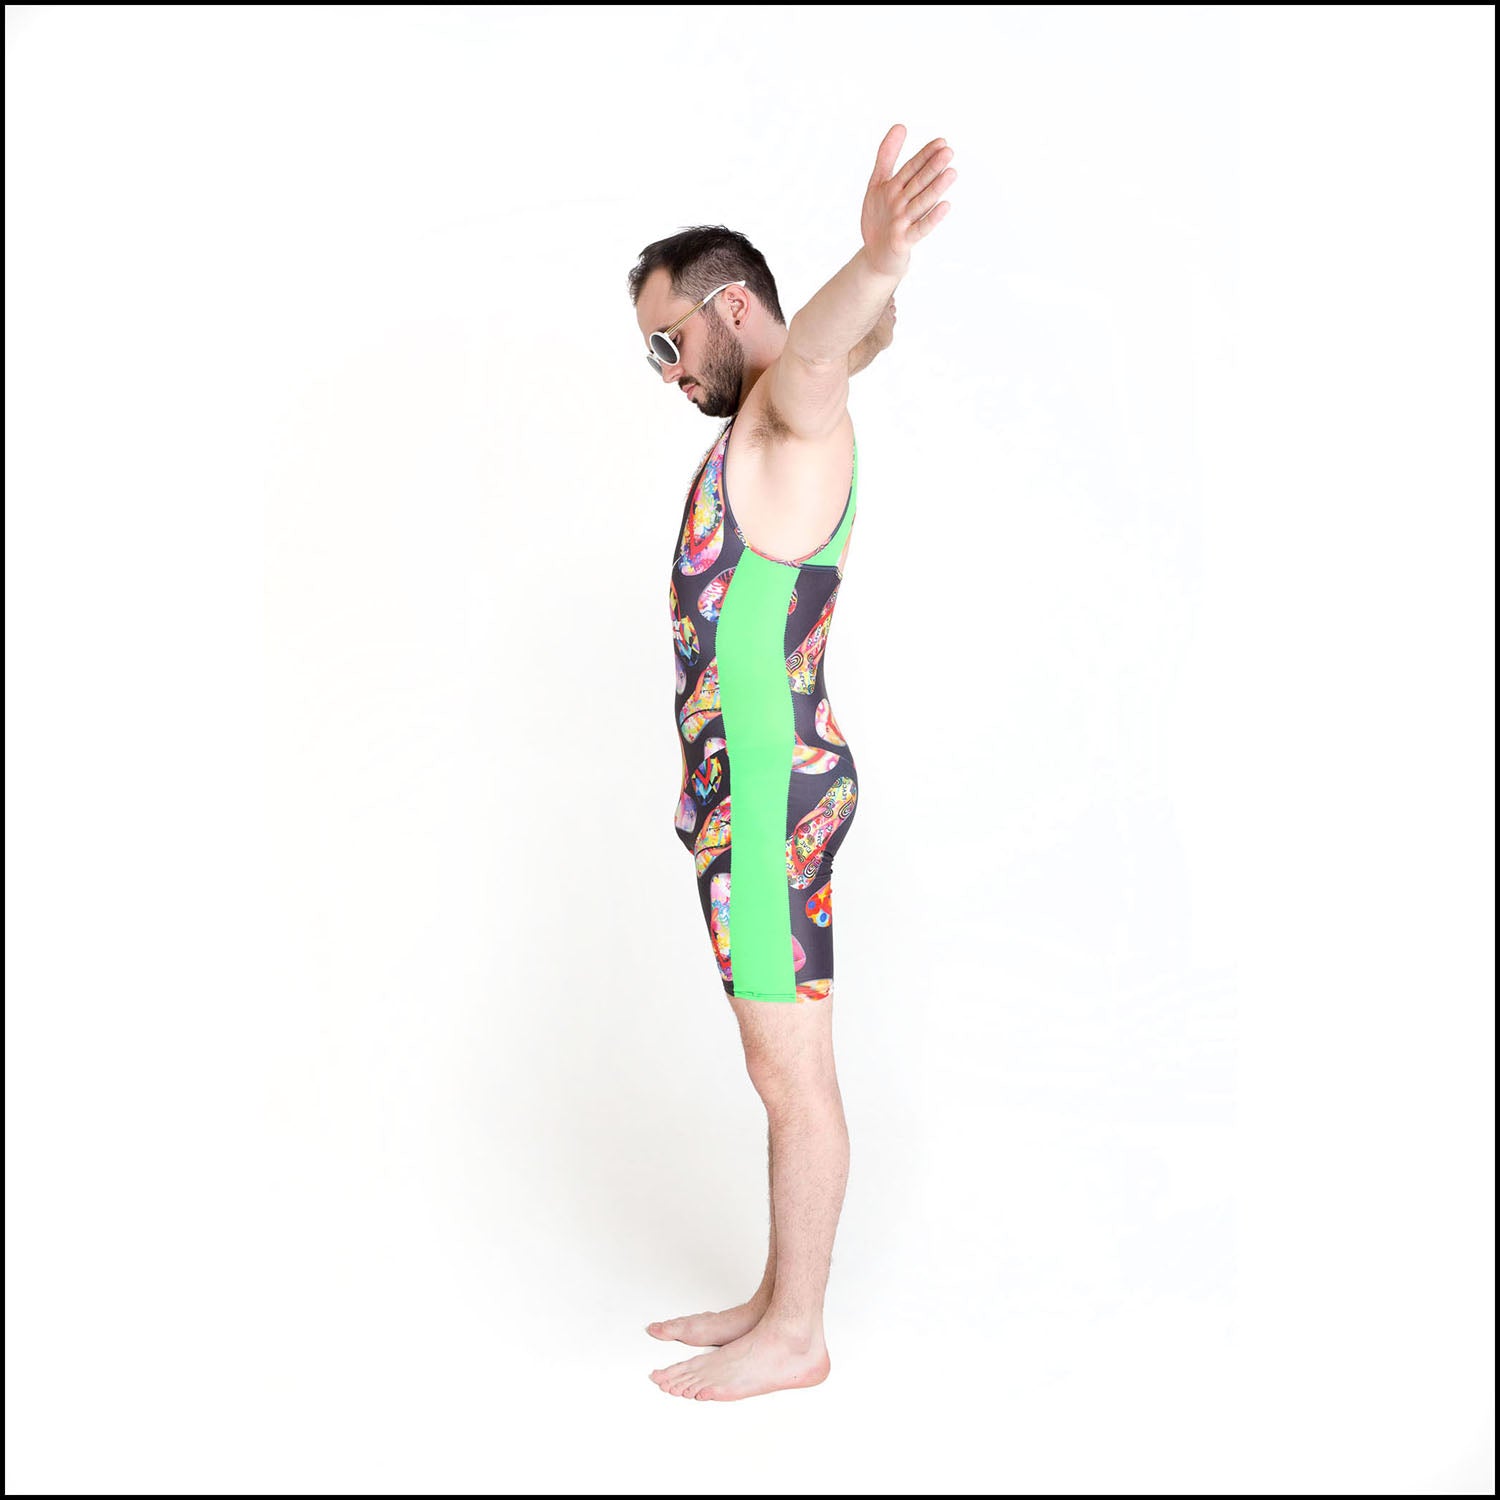 Diverse AF Catsuit. Handmade-to-order using colourful flipflop printed spandex, this tongue-in-cheek, cropped catsuit is both stylish and sustainable. The unisex design features a supportive racer back and figure flattering, neon green, contrast side panels.